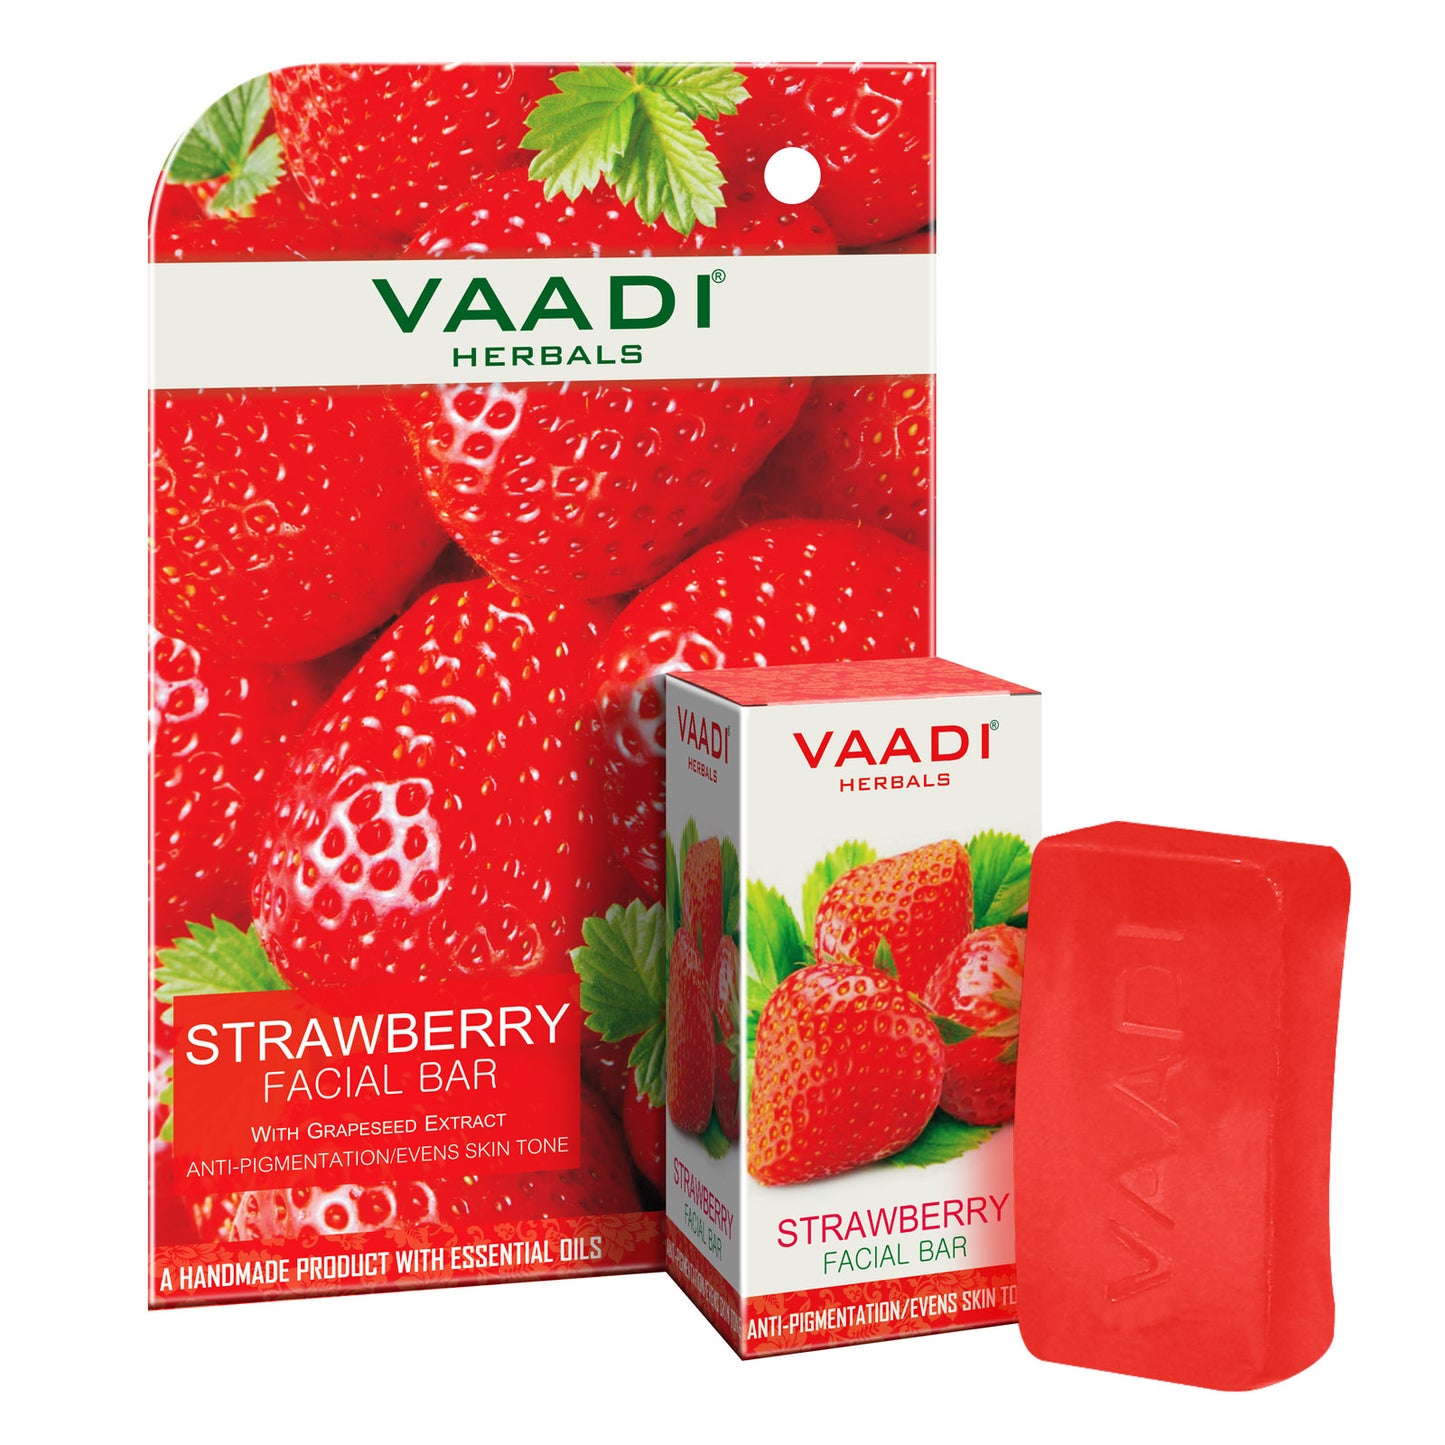 Strawberry Facial Bar with Grapeseed Extract (25 gms)